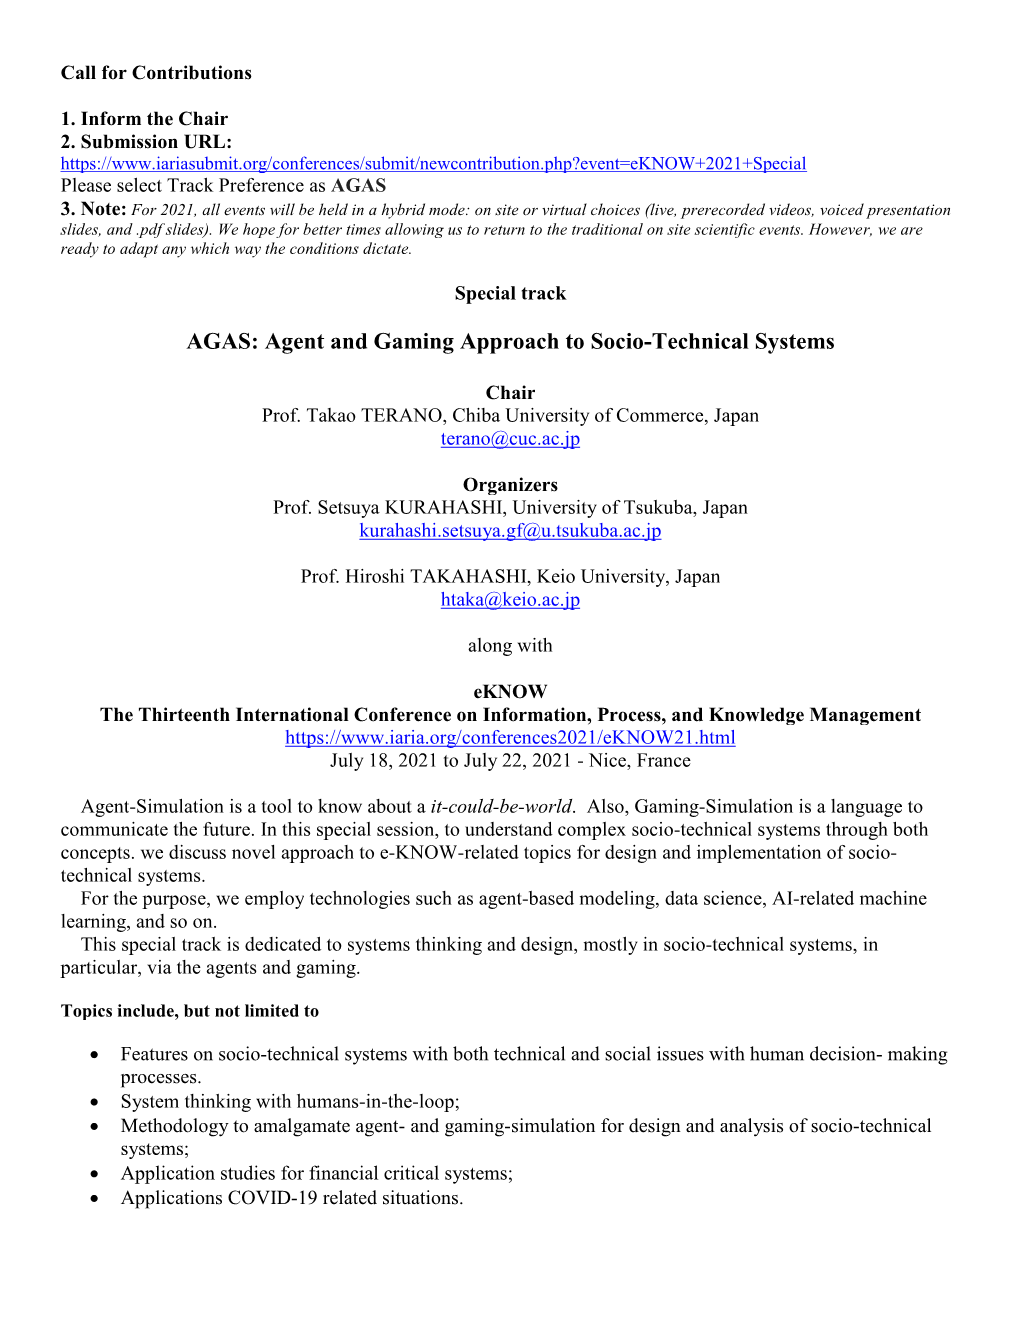 AGAS: Agent and Gaming Approach to Socio-Technical Systems